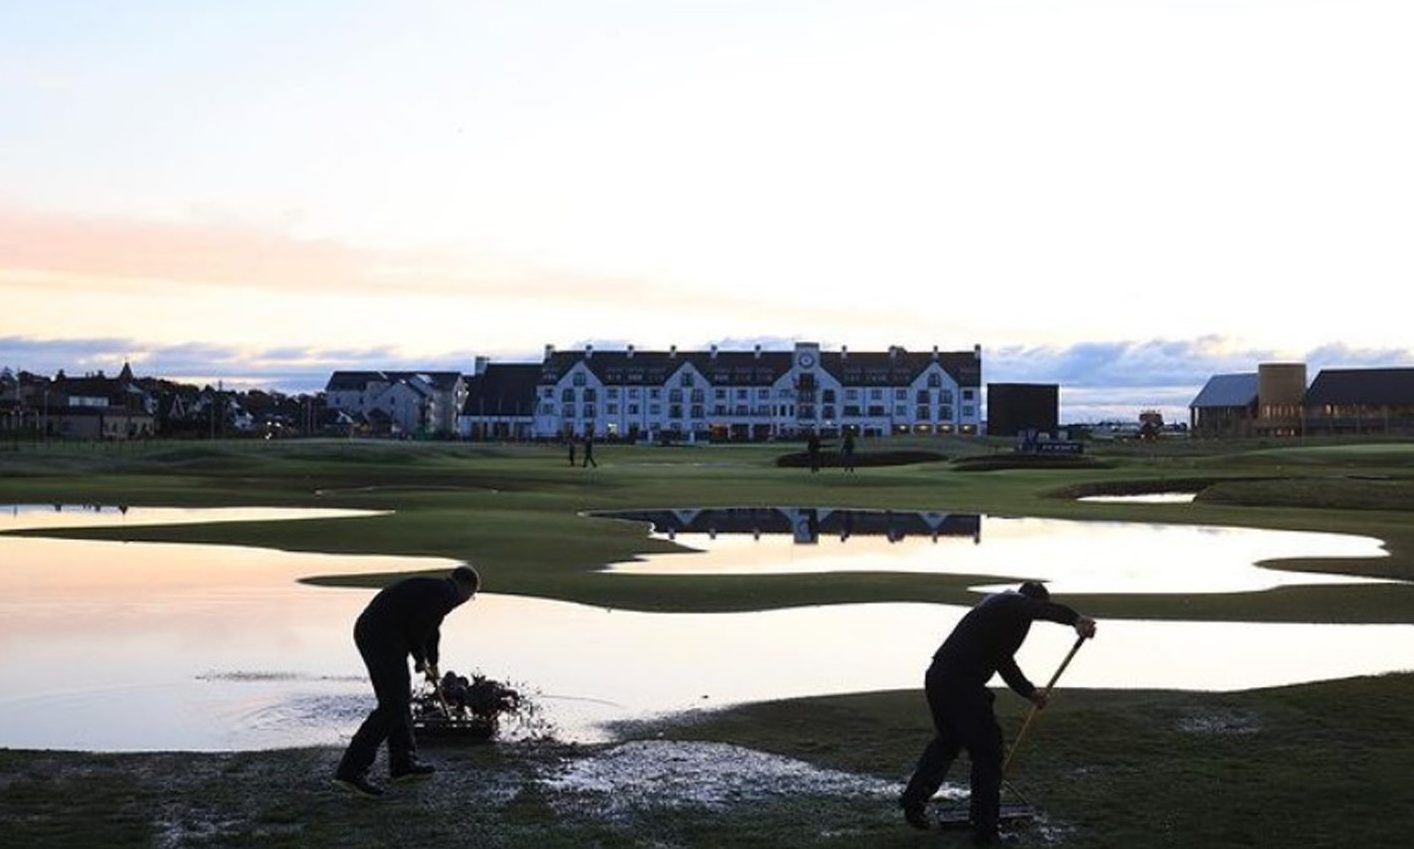 Greenkeepers at work at Carnoustie as dawn broke on Monday. Image: Dunhill Links Championship